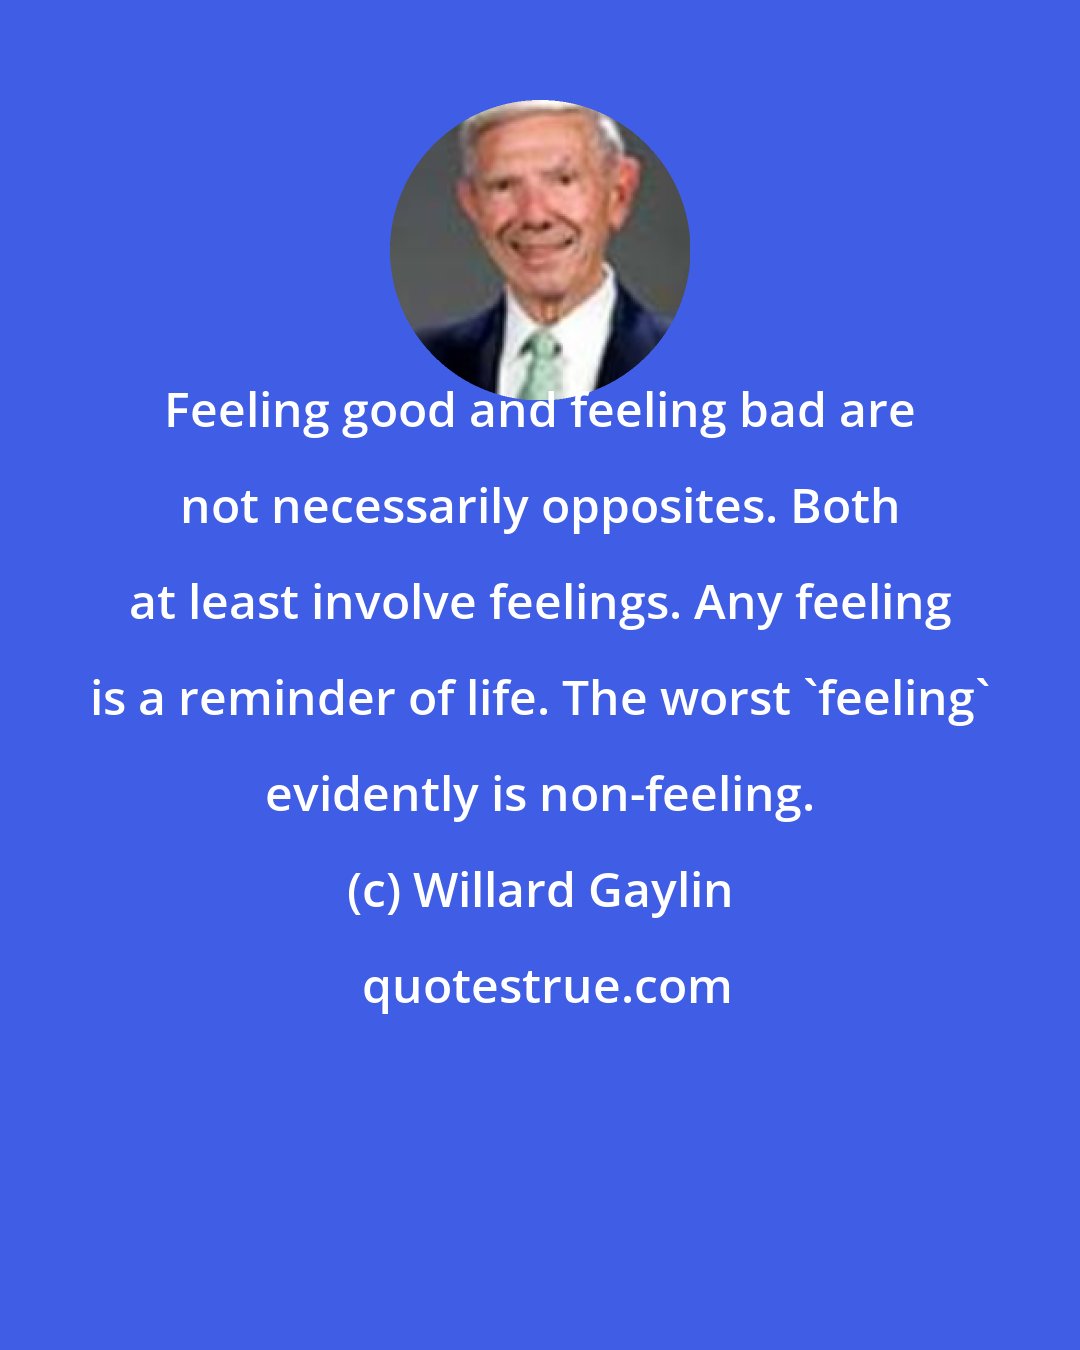 Willard Gaylin: Feeling good and feeling bad are not necessarily opposites. Both at least involve feelings. Any feeling is a reminder of life. The worst 'feeling' evidently is non-feeling.